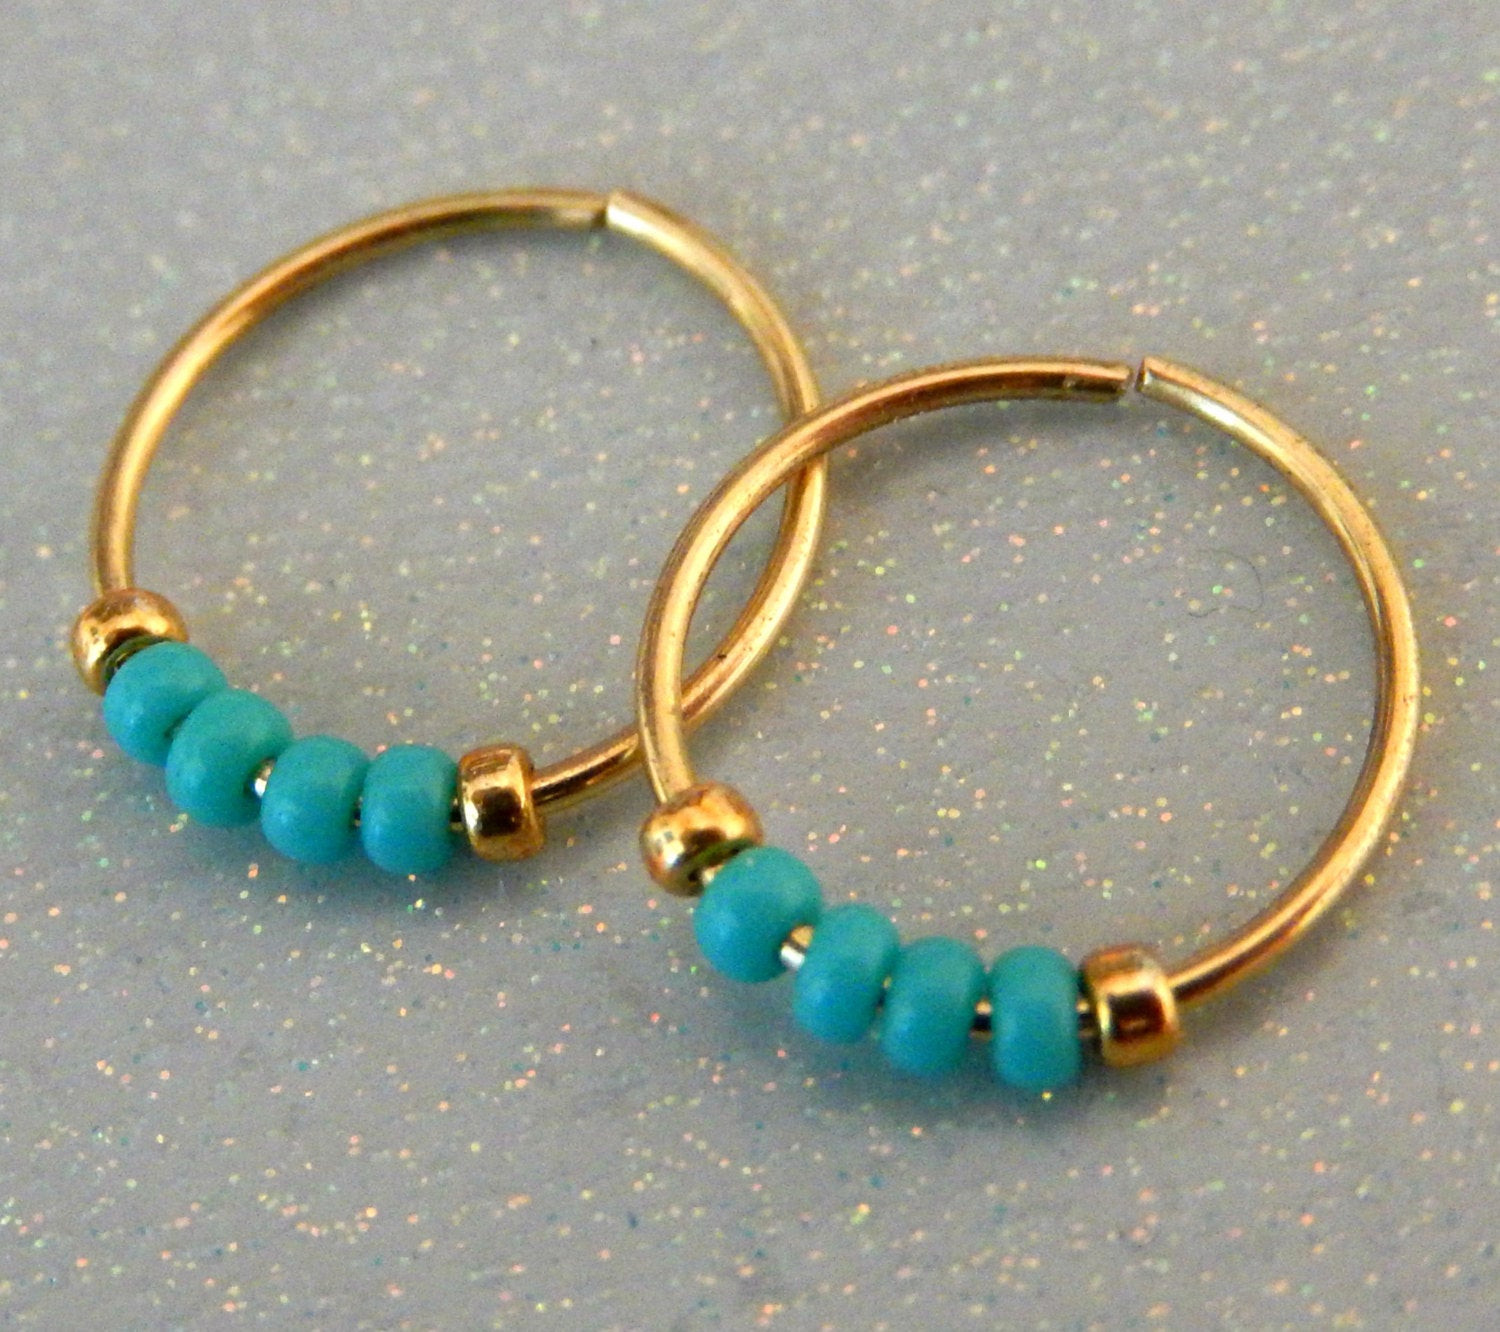 Small Hoop Earrings For Cartilage
 Cartilage hoop earrings Small Hoop Earrings turquoise